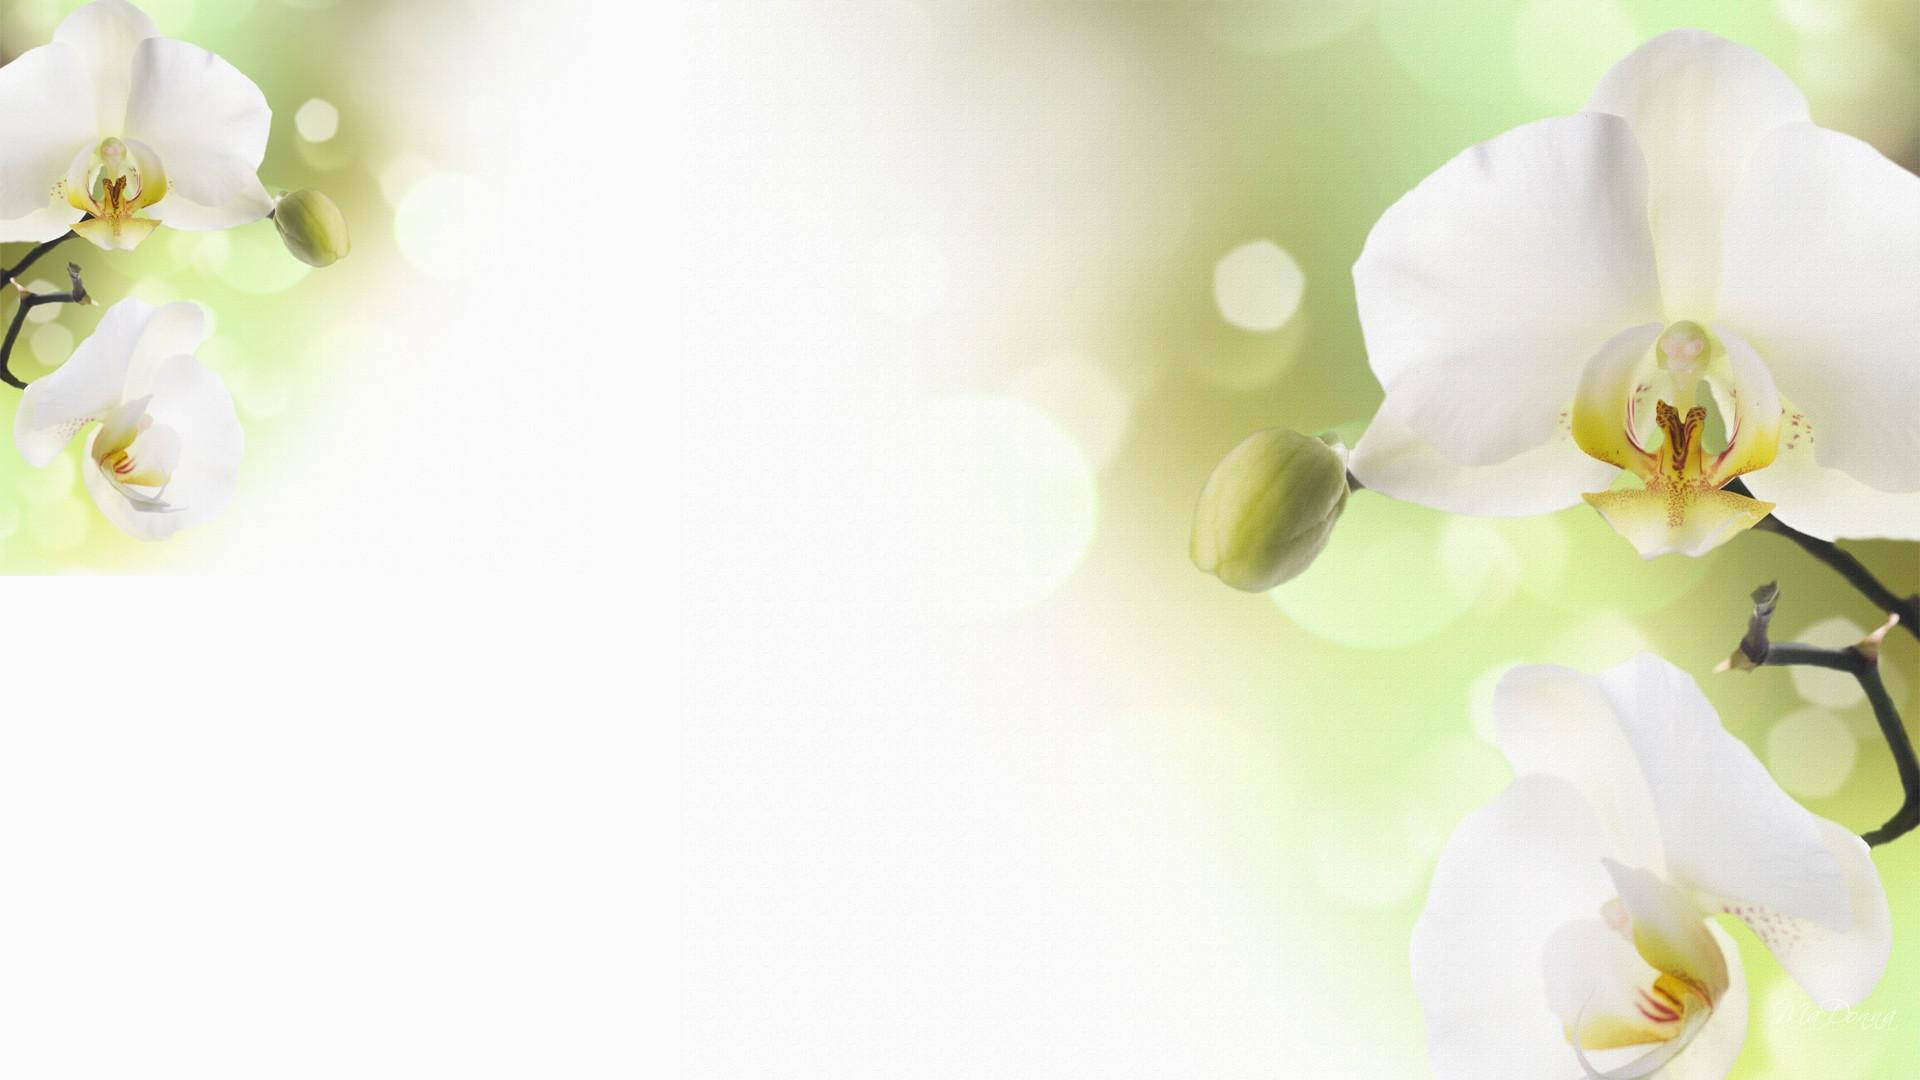 White Orchid With Lime Green Petals Background